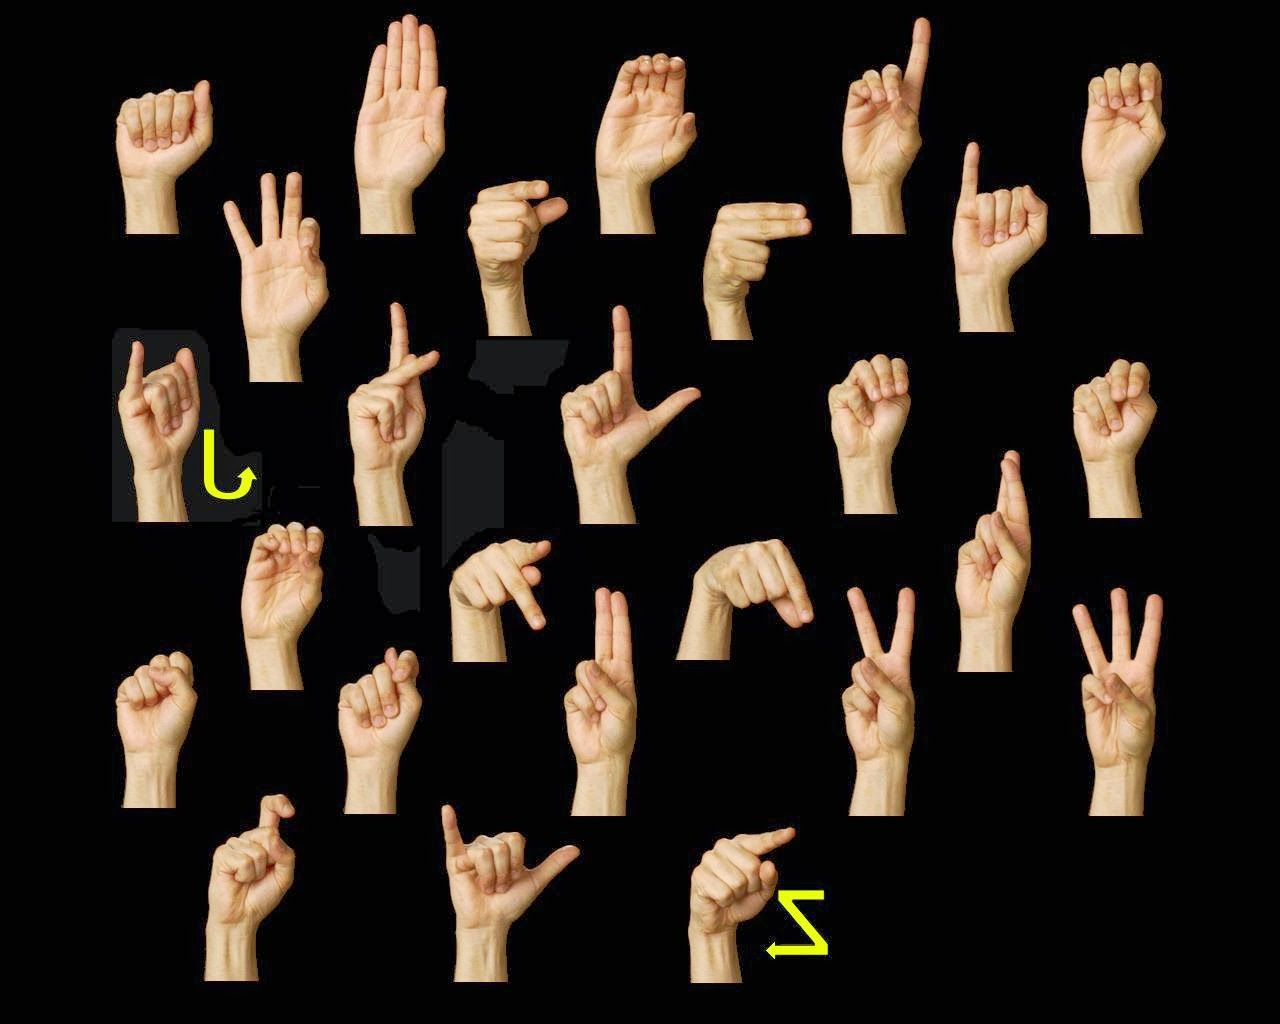 Where In Sign Language – Google image result for https://www.dummies.com/wp-content/uploads/sign